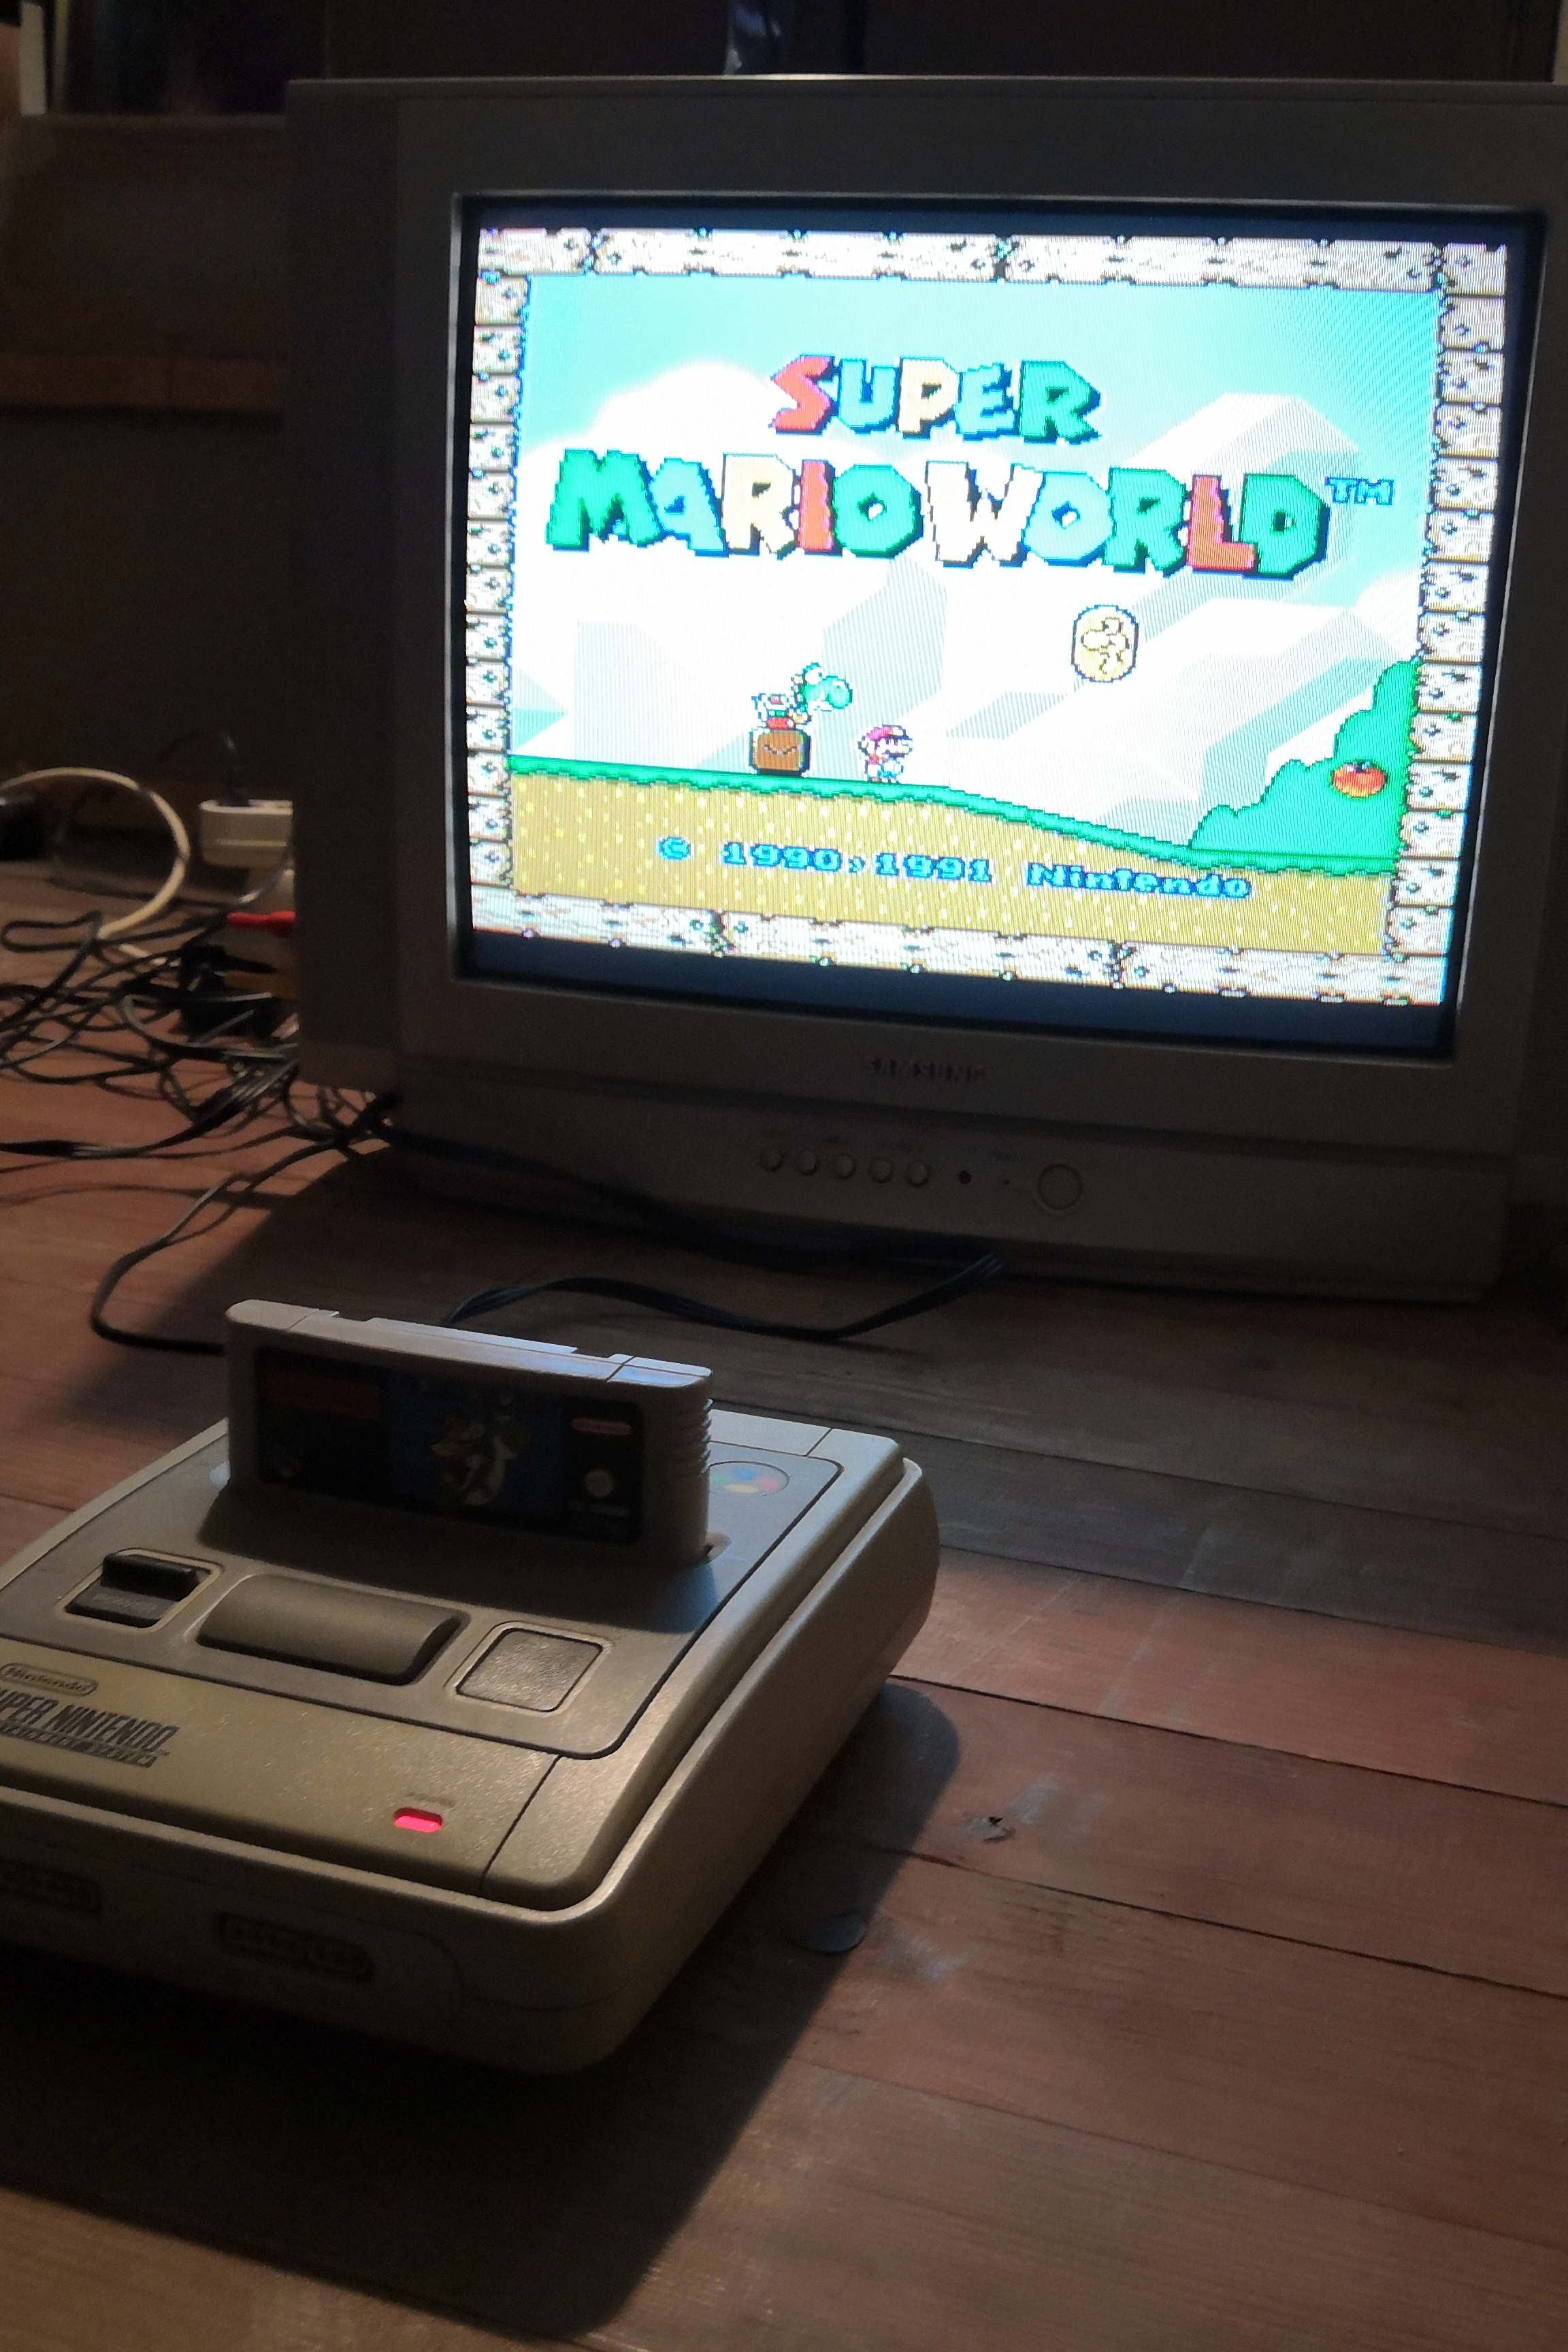 Old School Gaming on Retro Consoles - Airbnb